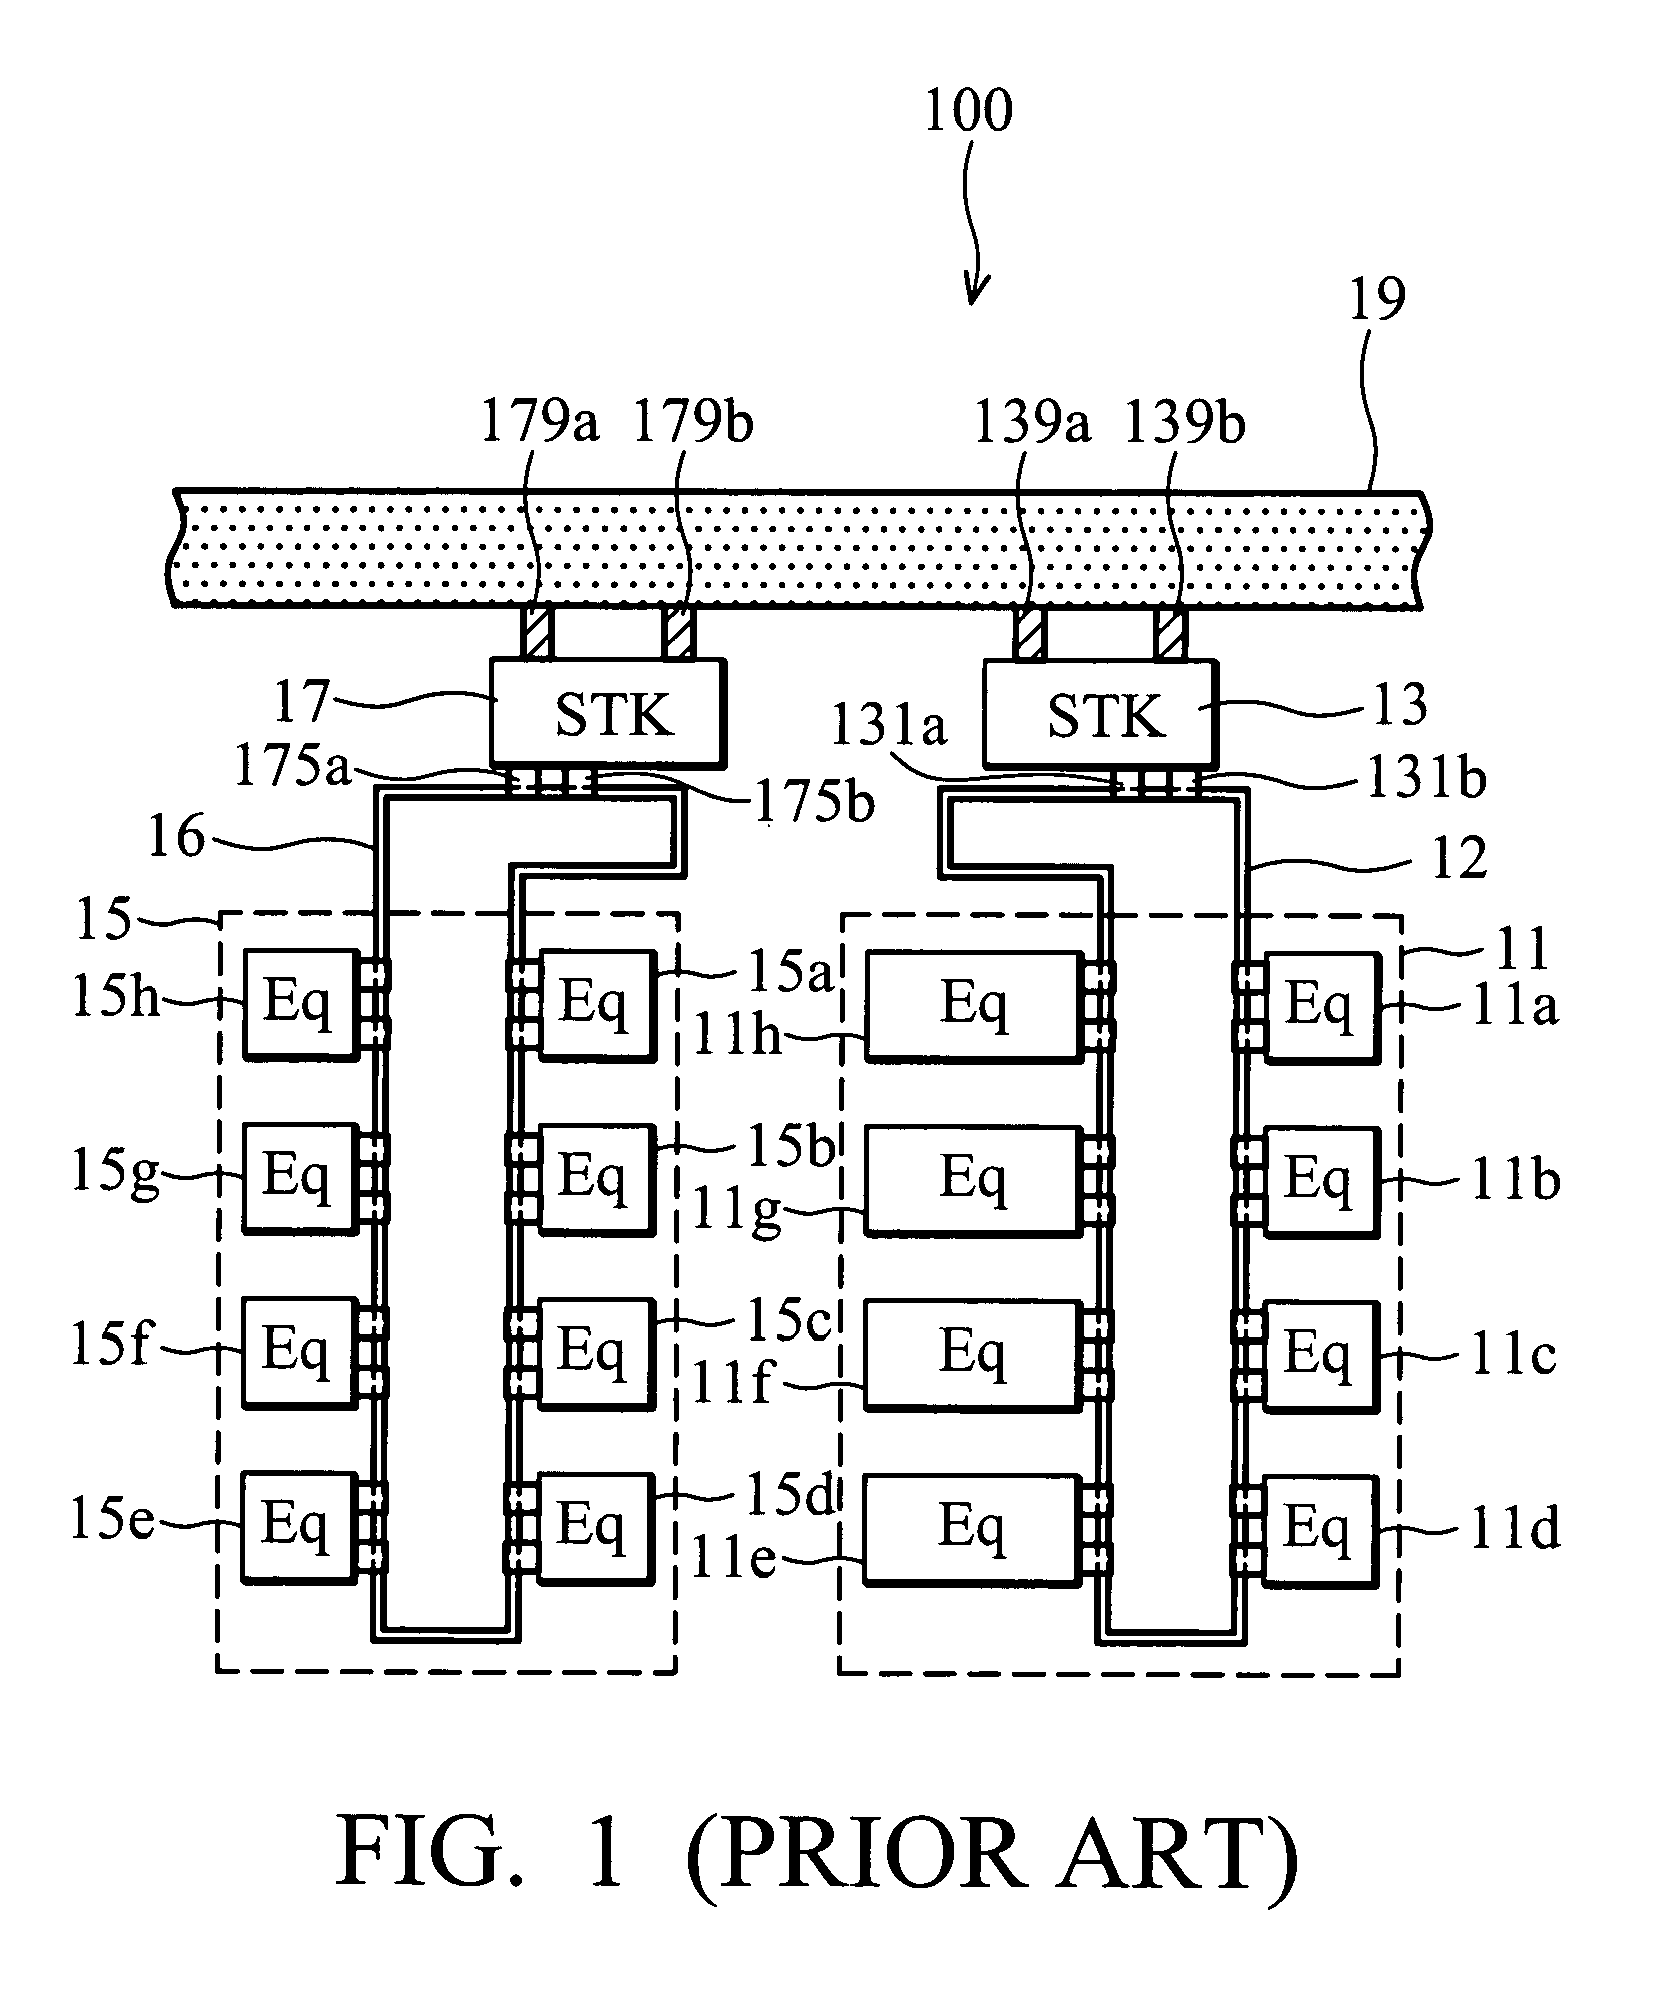 Transport system with multiple-load-port stockers